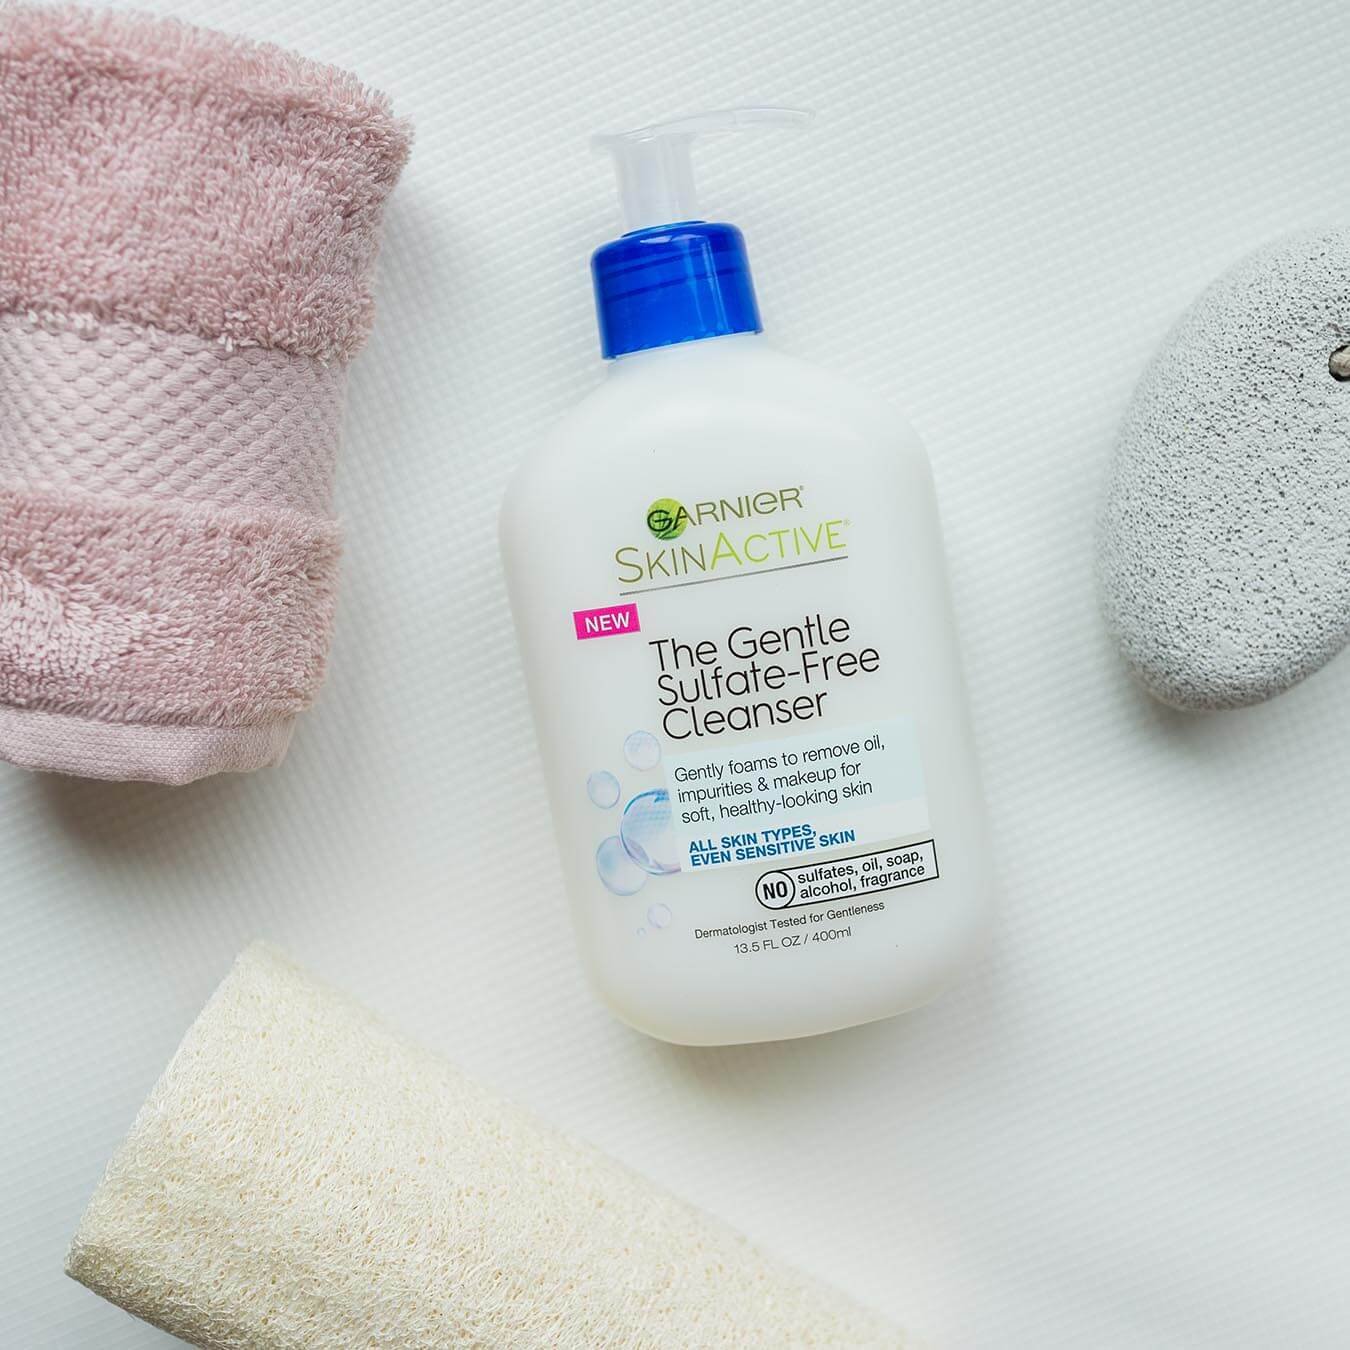 Garnier SkinActive Gentle Sulfate-Free Cleanser on a white mat next to a rolled up pink hand towel, pumice stone on a rope, and loofah.